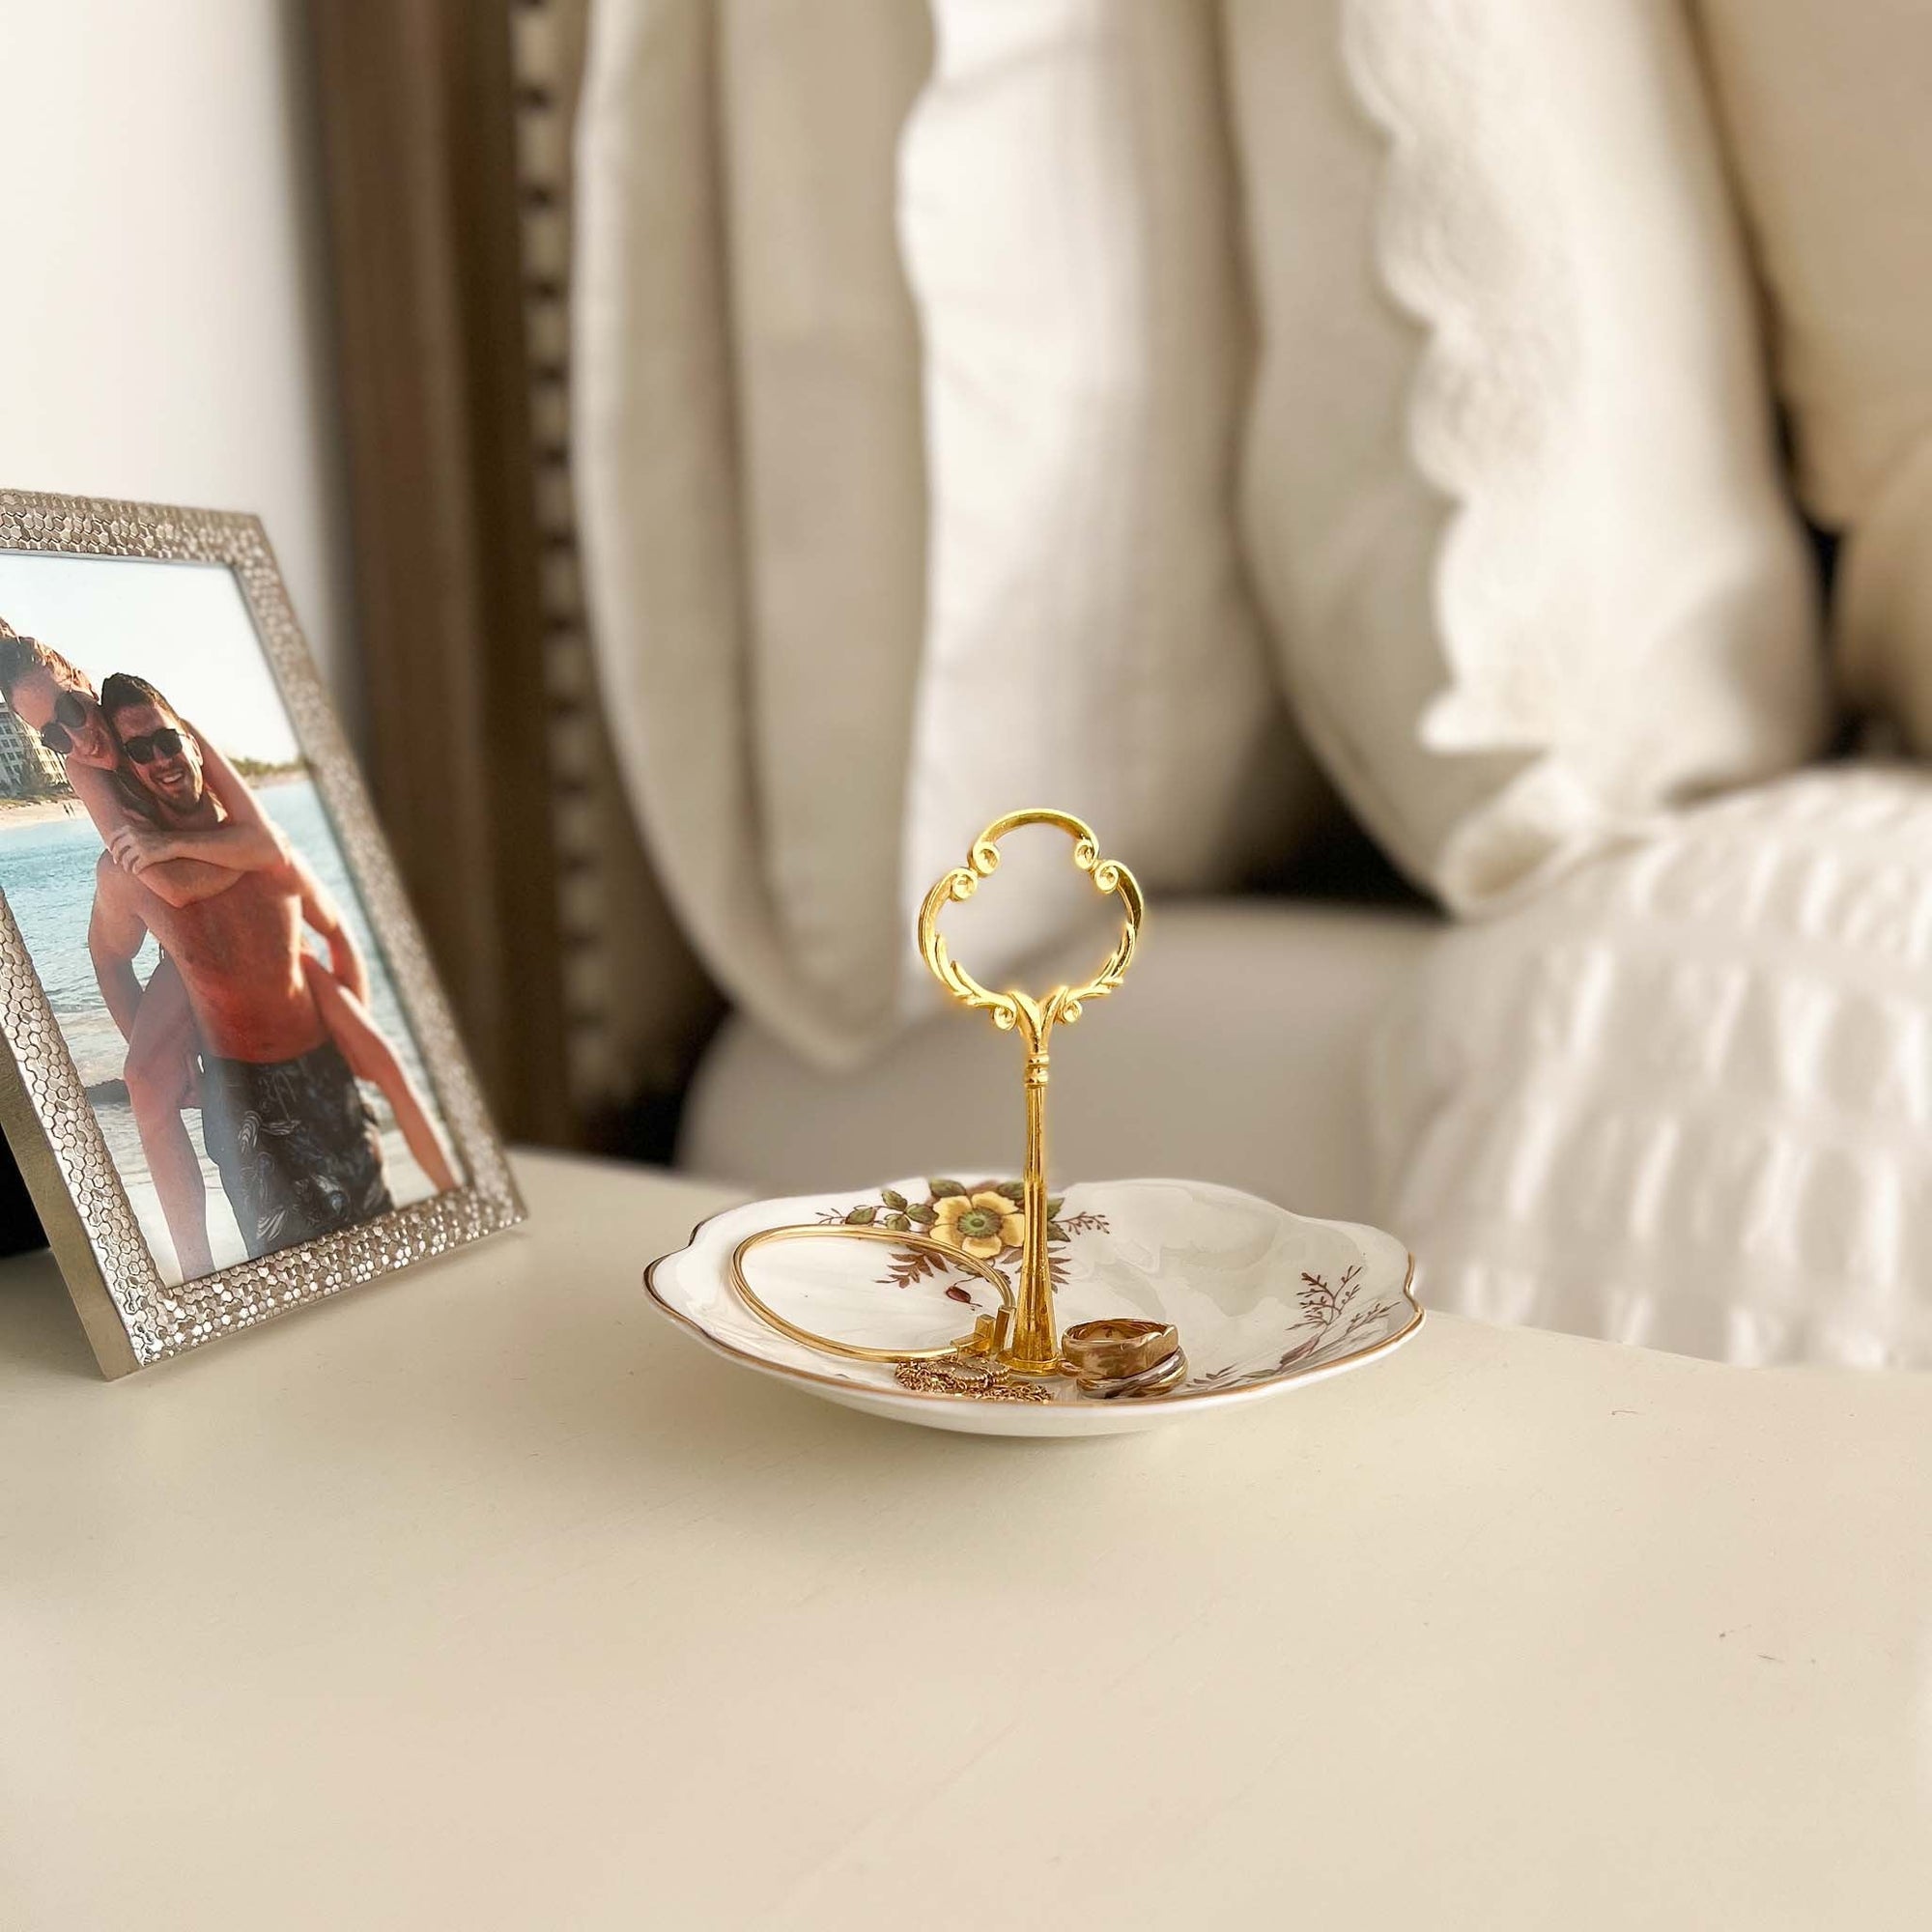 Ring &amp; Candy Dish | Upcycle | The Brooklyn Teacup - The Brooklyn Teacup